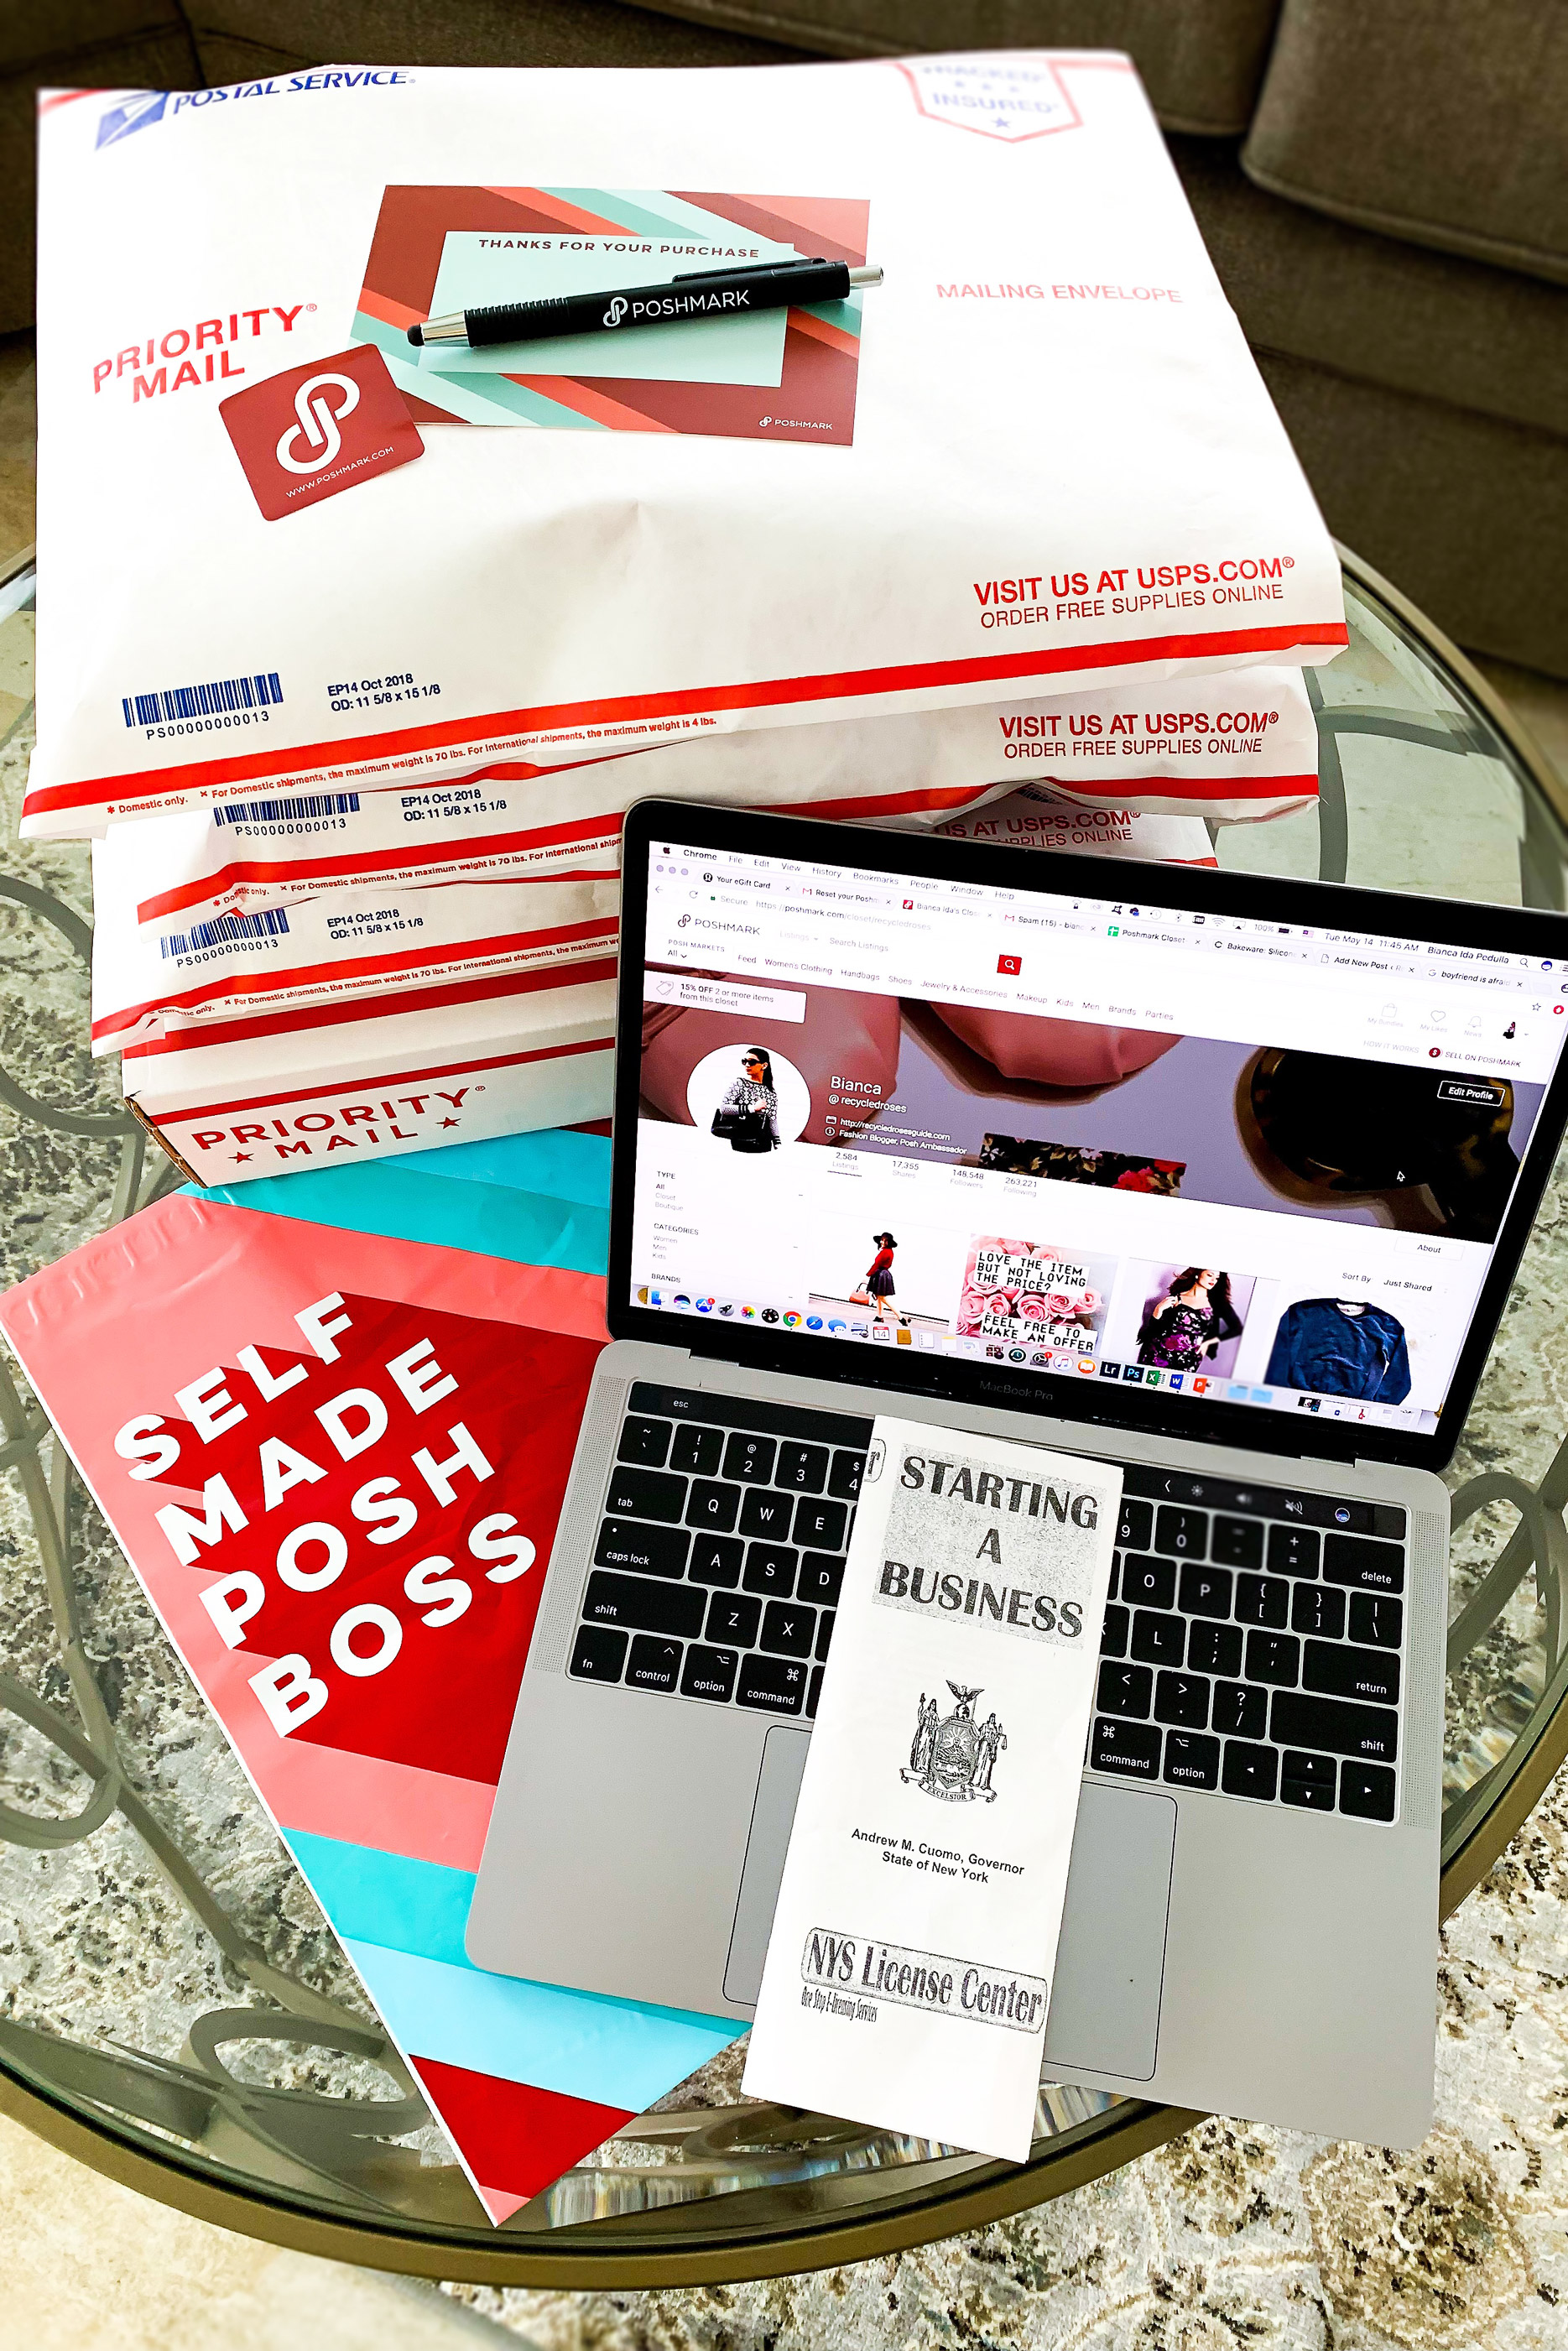 Poshmark as a Business: Getting Started- Should I Register as a Business?